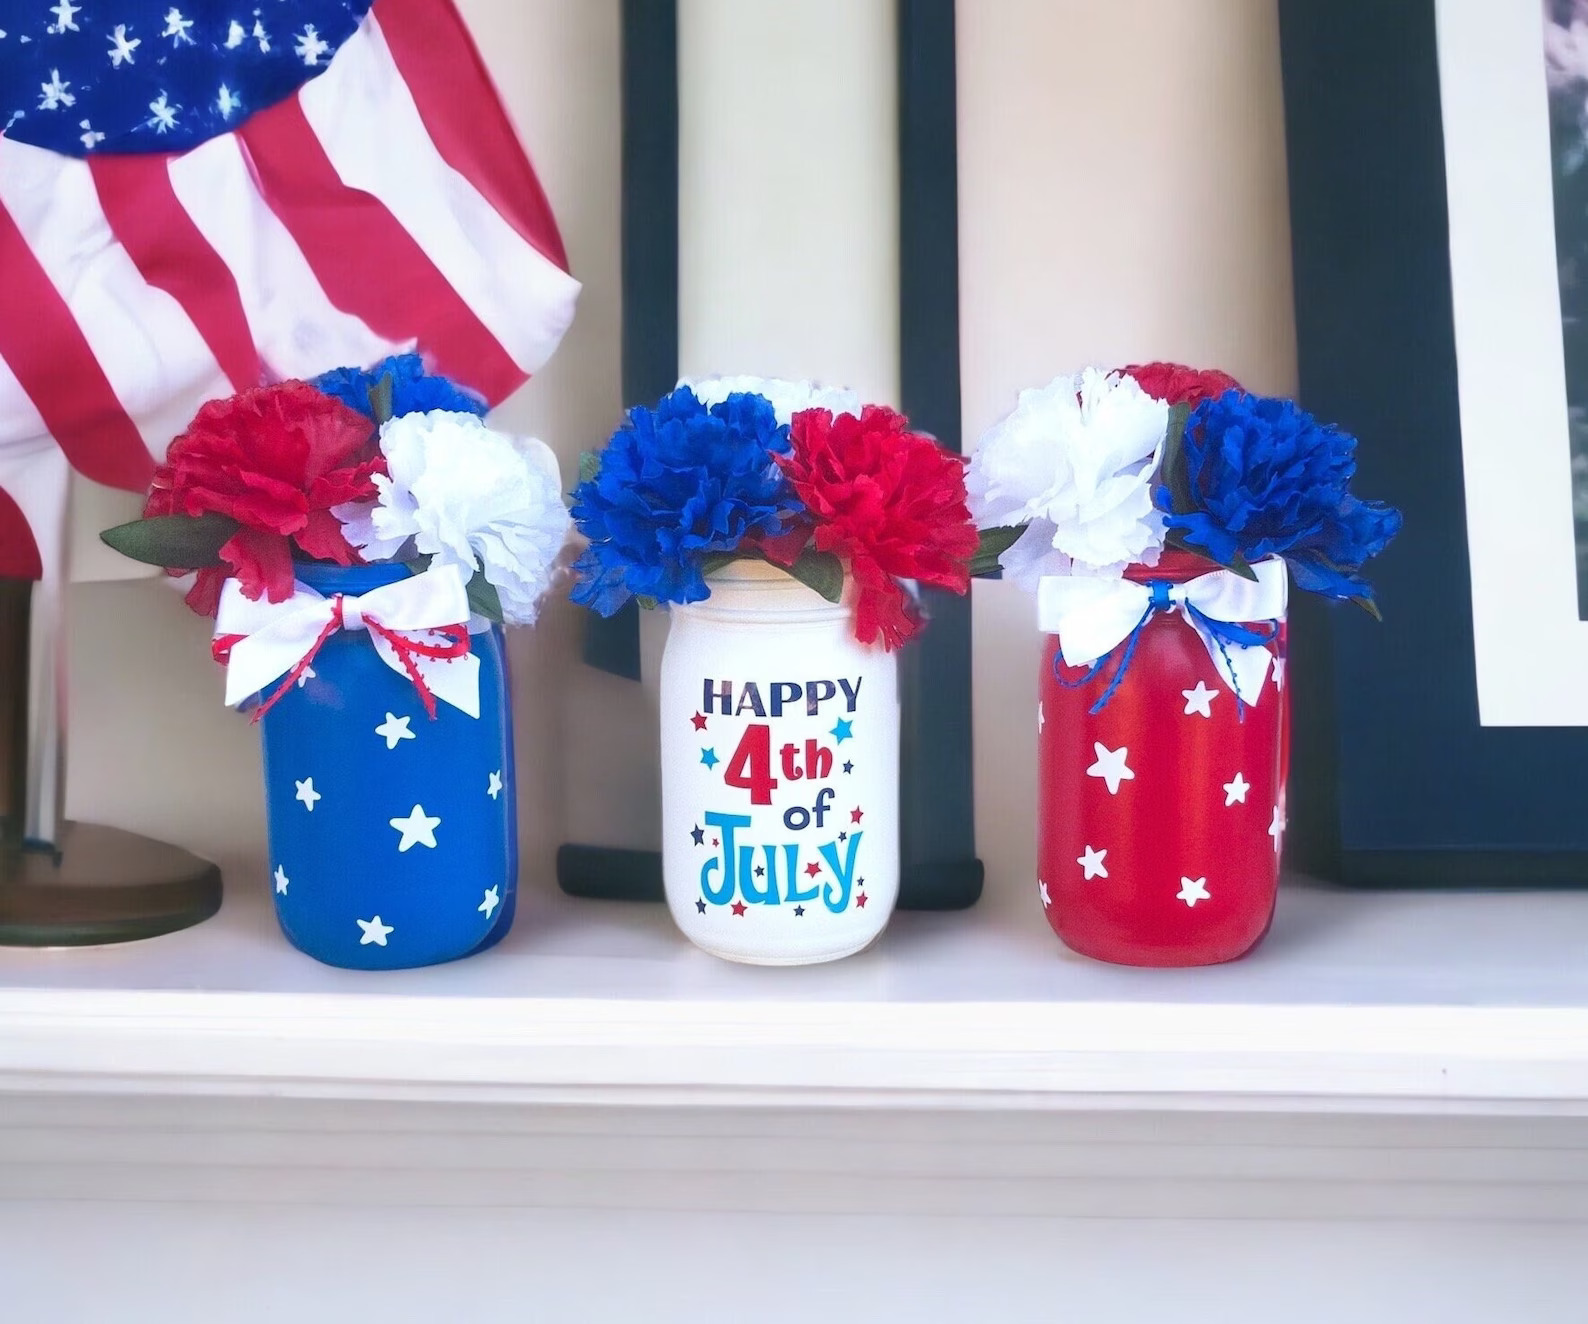 15 Charming 4th of July Centerpiece Designs for Festive Tablescapes